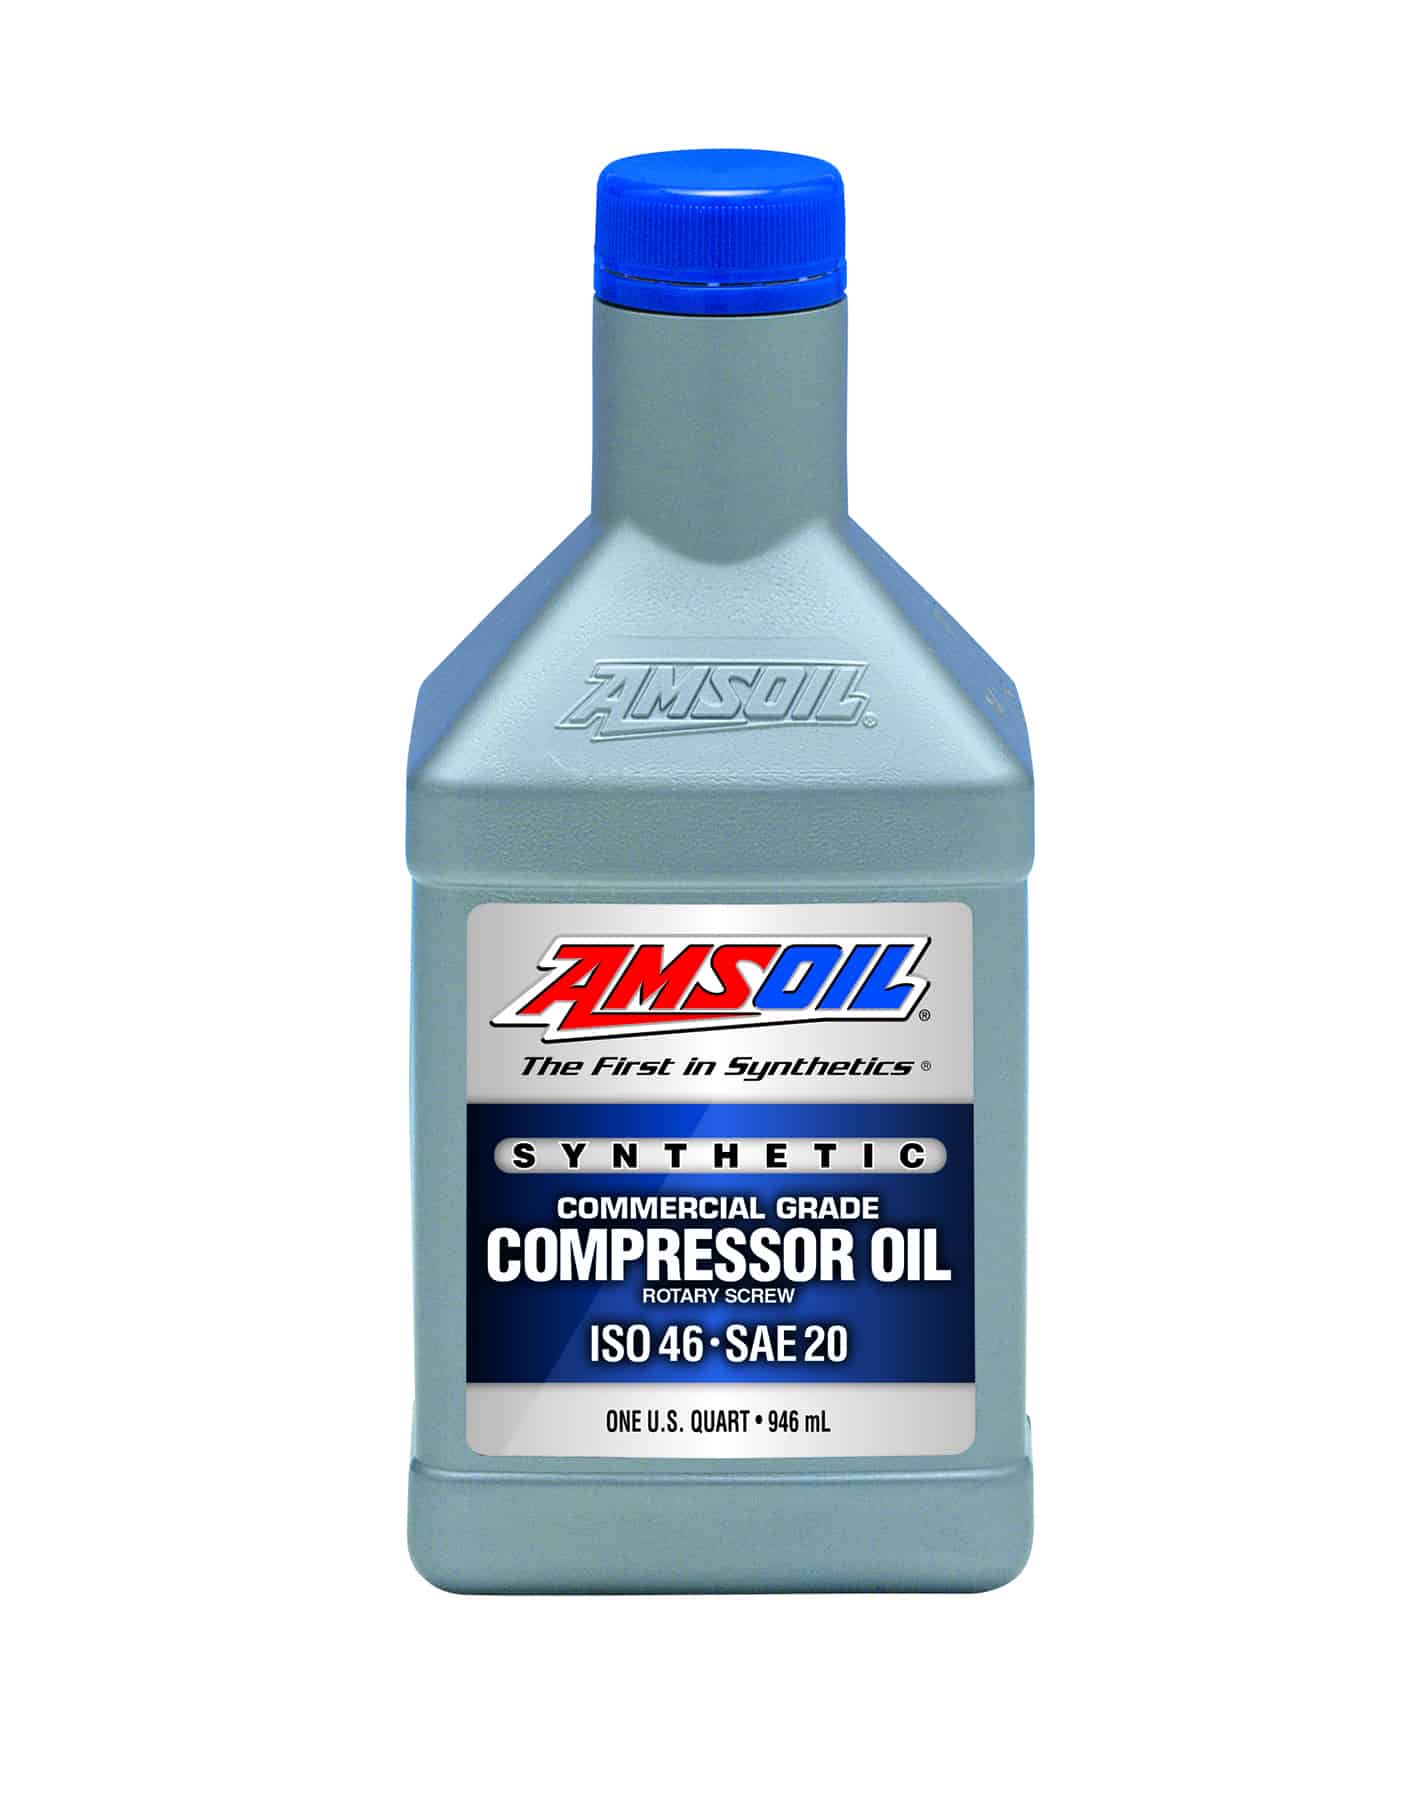 A bottle of AMSOIL Synthetic Compressor Oil, formulated for maximum protection at high temperatures. It reduces maintenance & waste oil disposal costs.